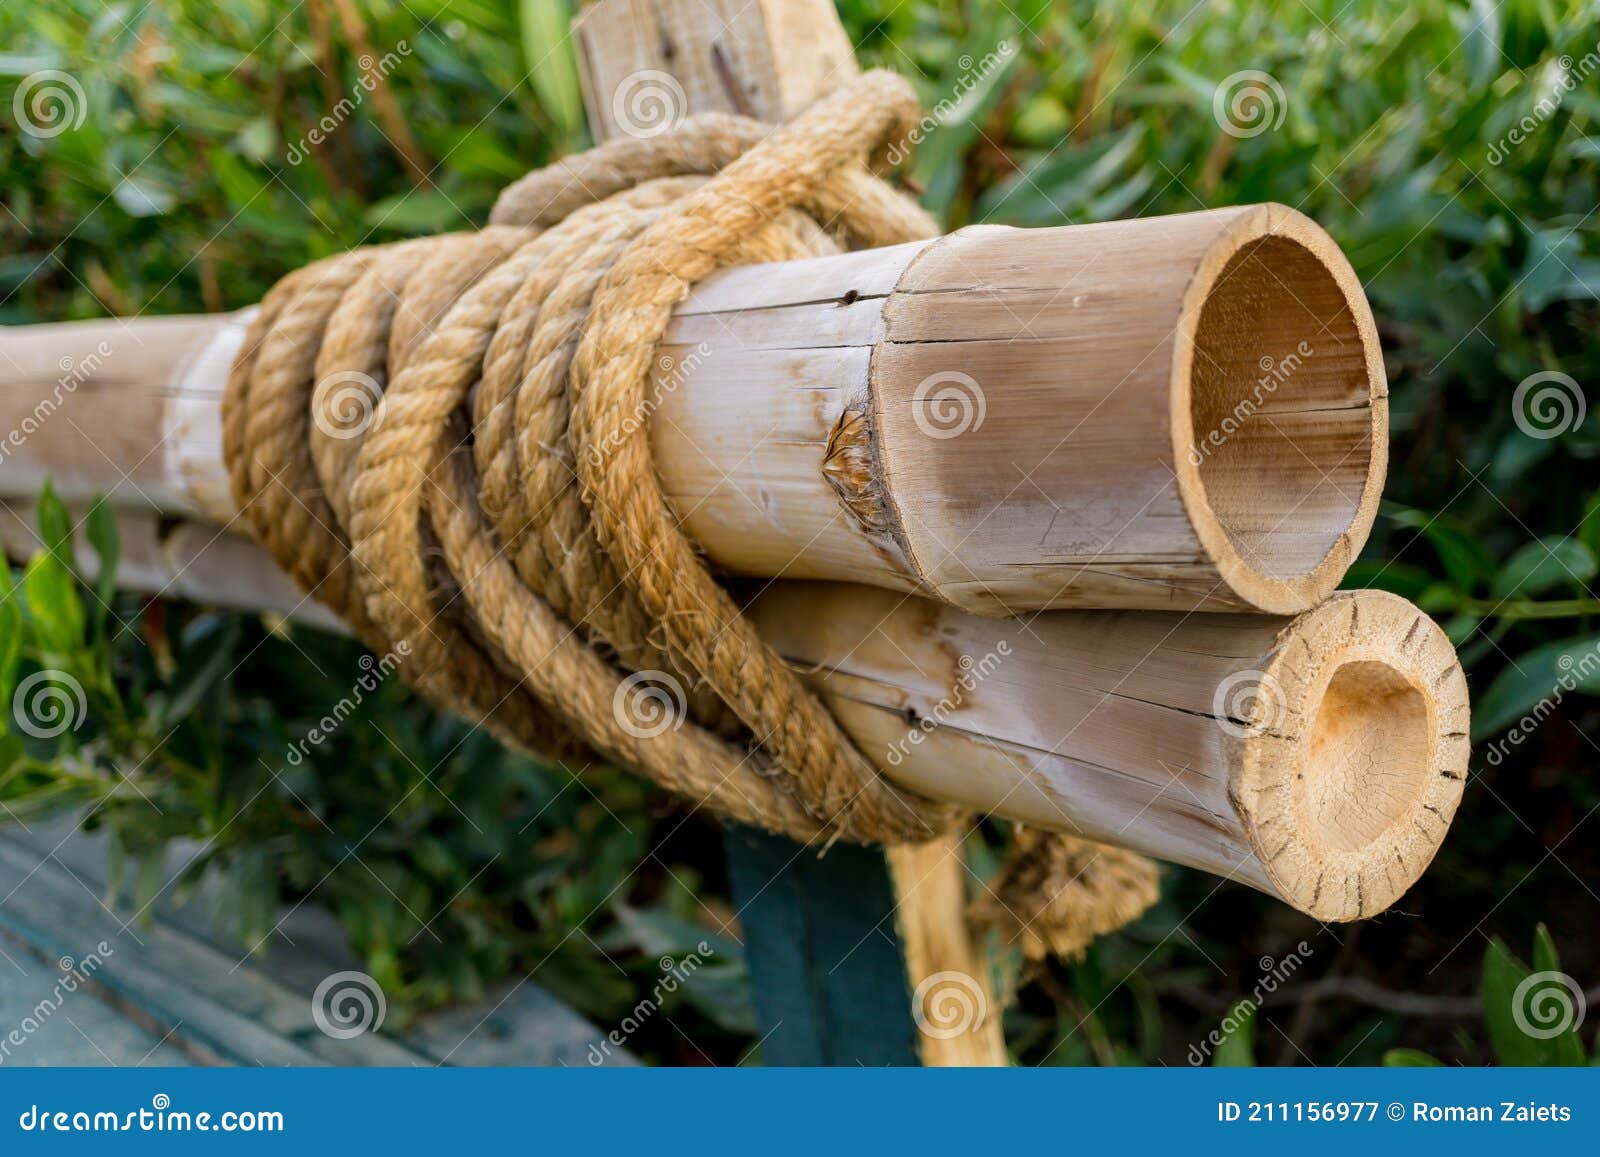 Bamboo Poles Tied by a Thick Rope Stock Image - Image of panel, background:  211156977